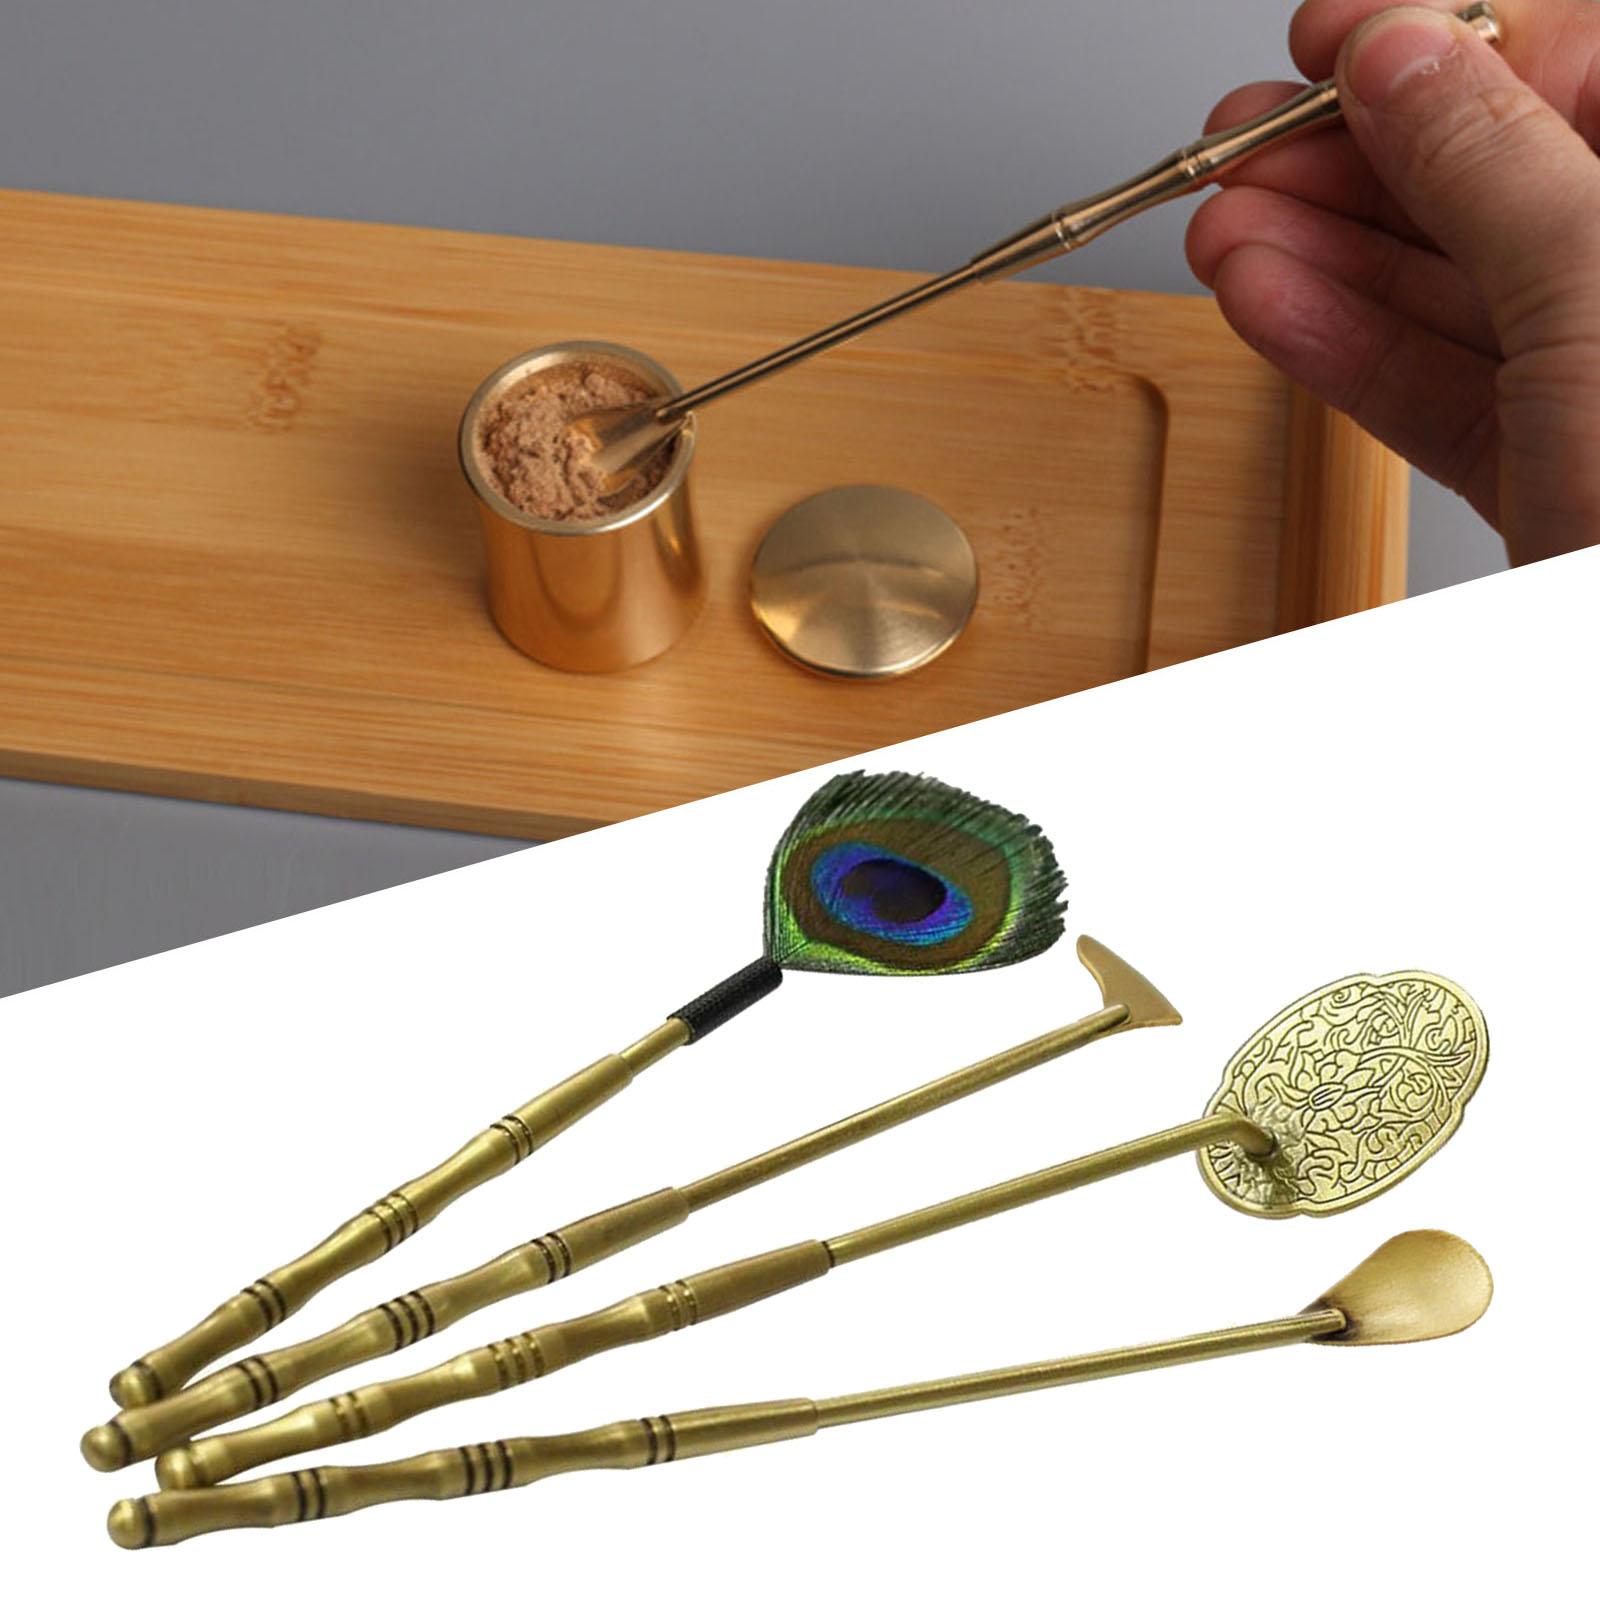 Home Incense Making Kit Feather Sweep Brass for Incense Burner Supplies